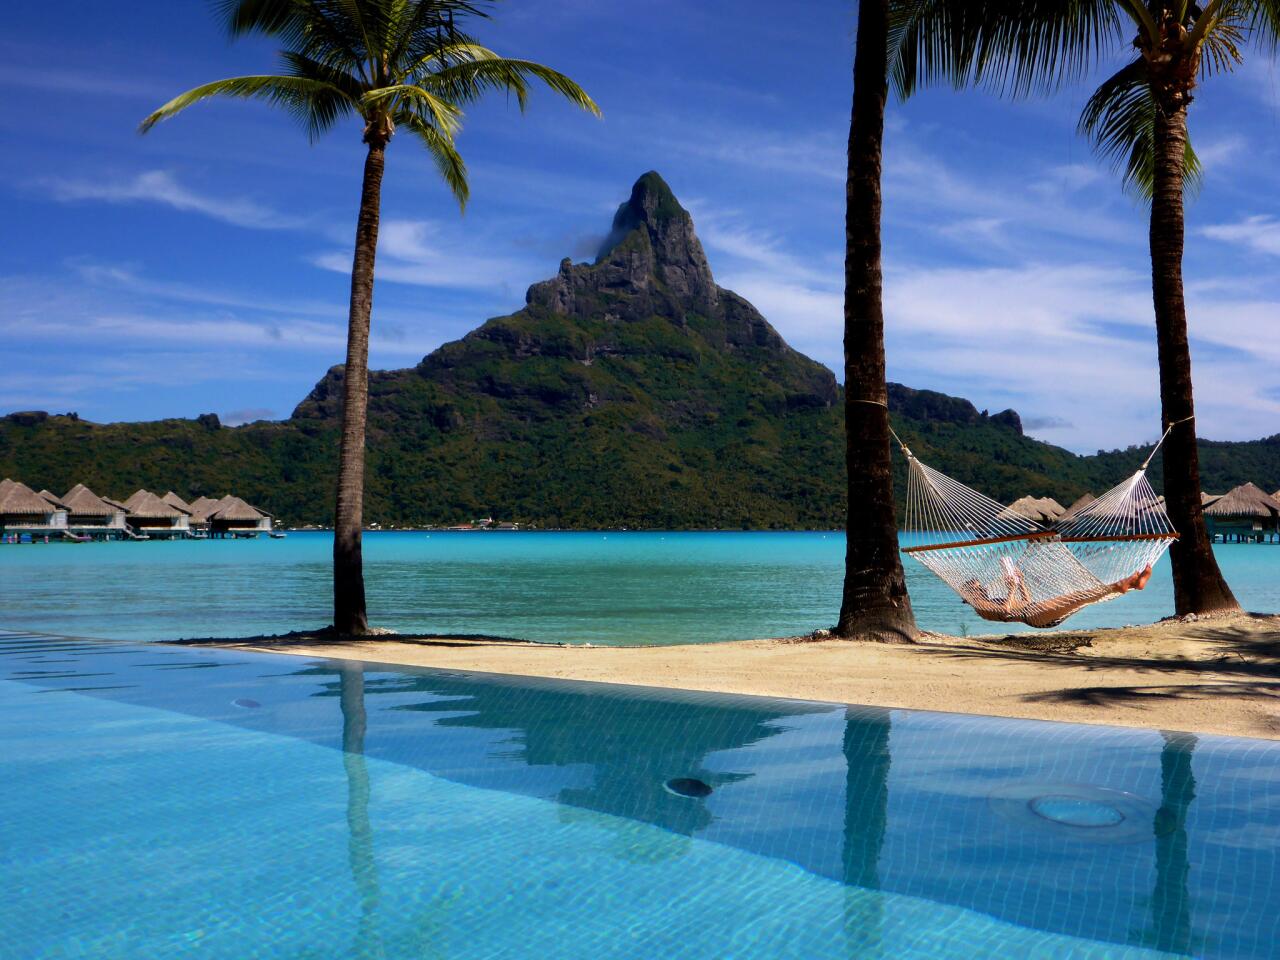 A guest reads a book on the beach at the InterContinental Bora Bora Resort and Thalasso Spa, commonly called the Thalasso, in Bora-Bora. Mt. Otemanu looms in the background.